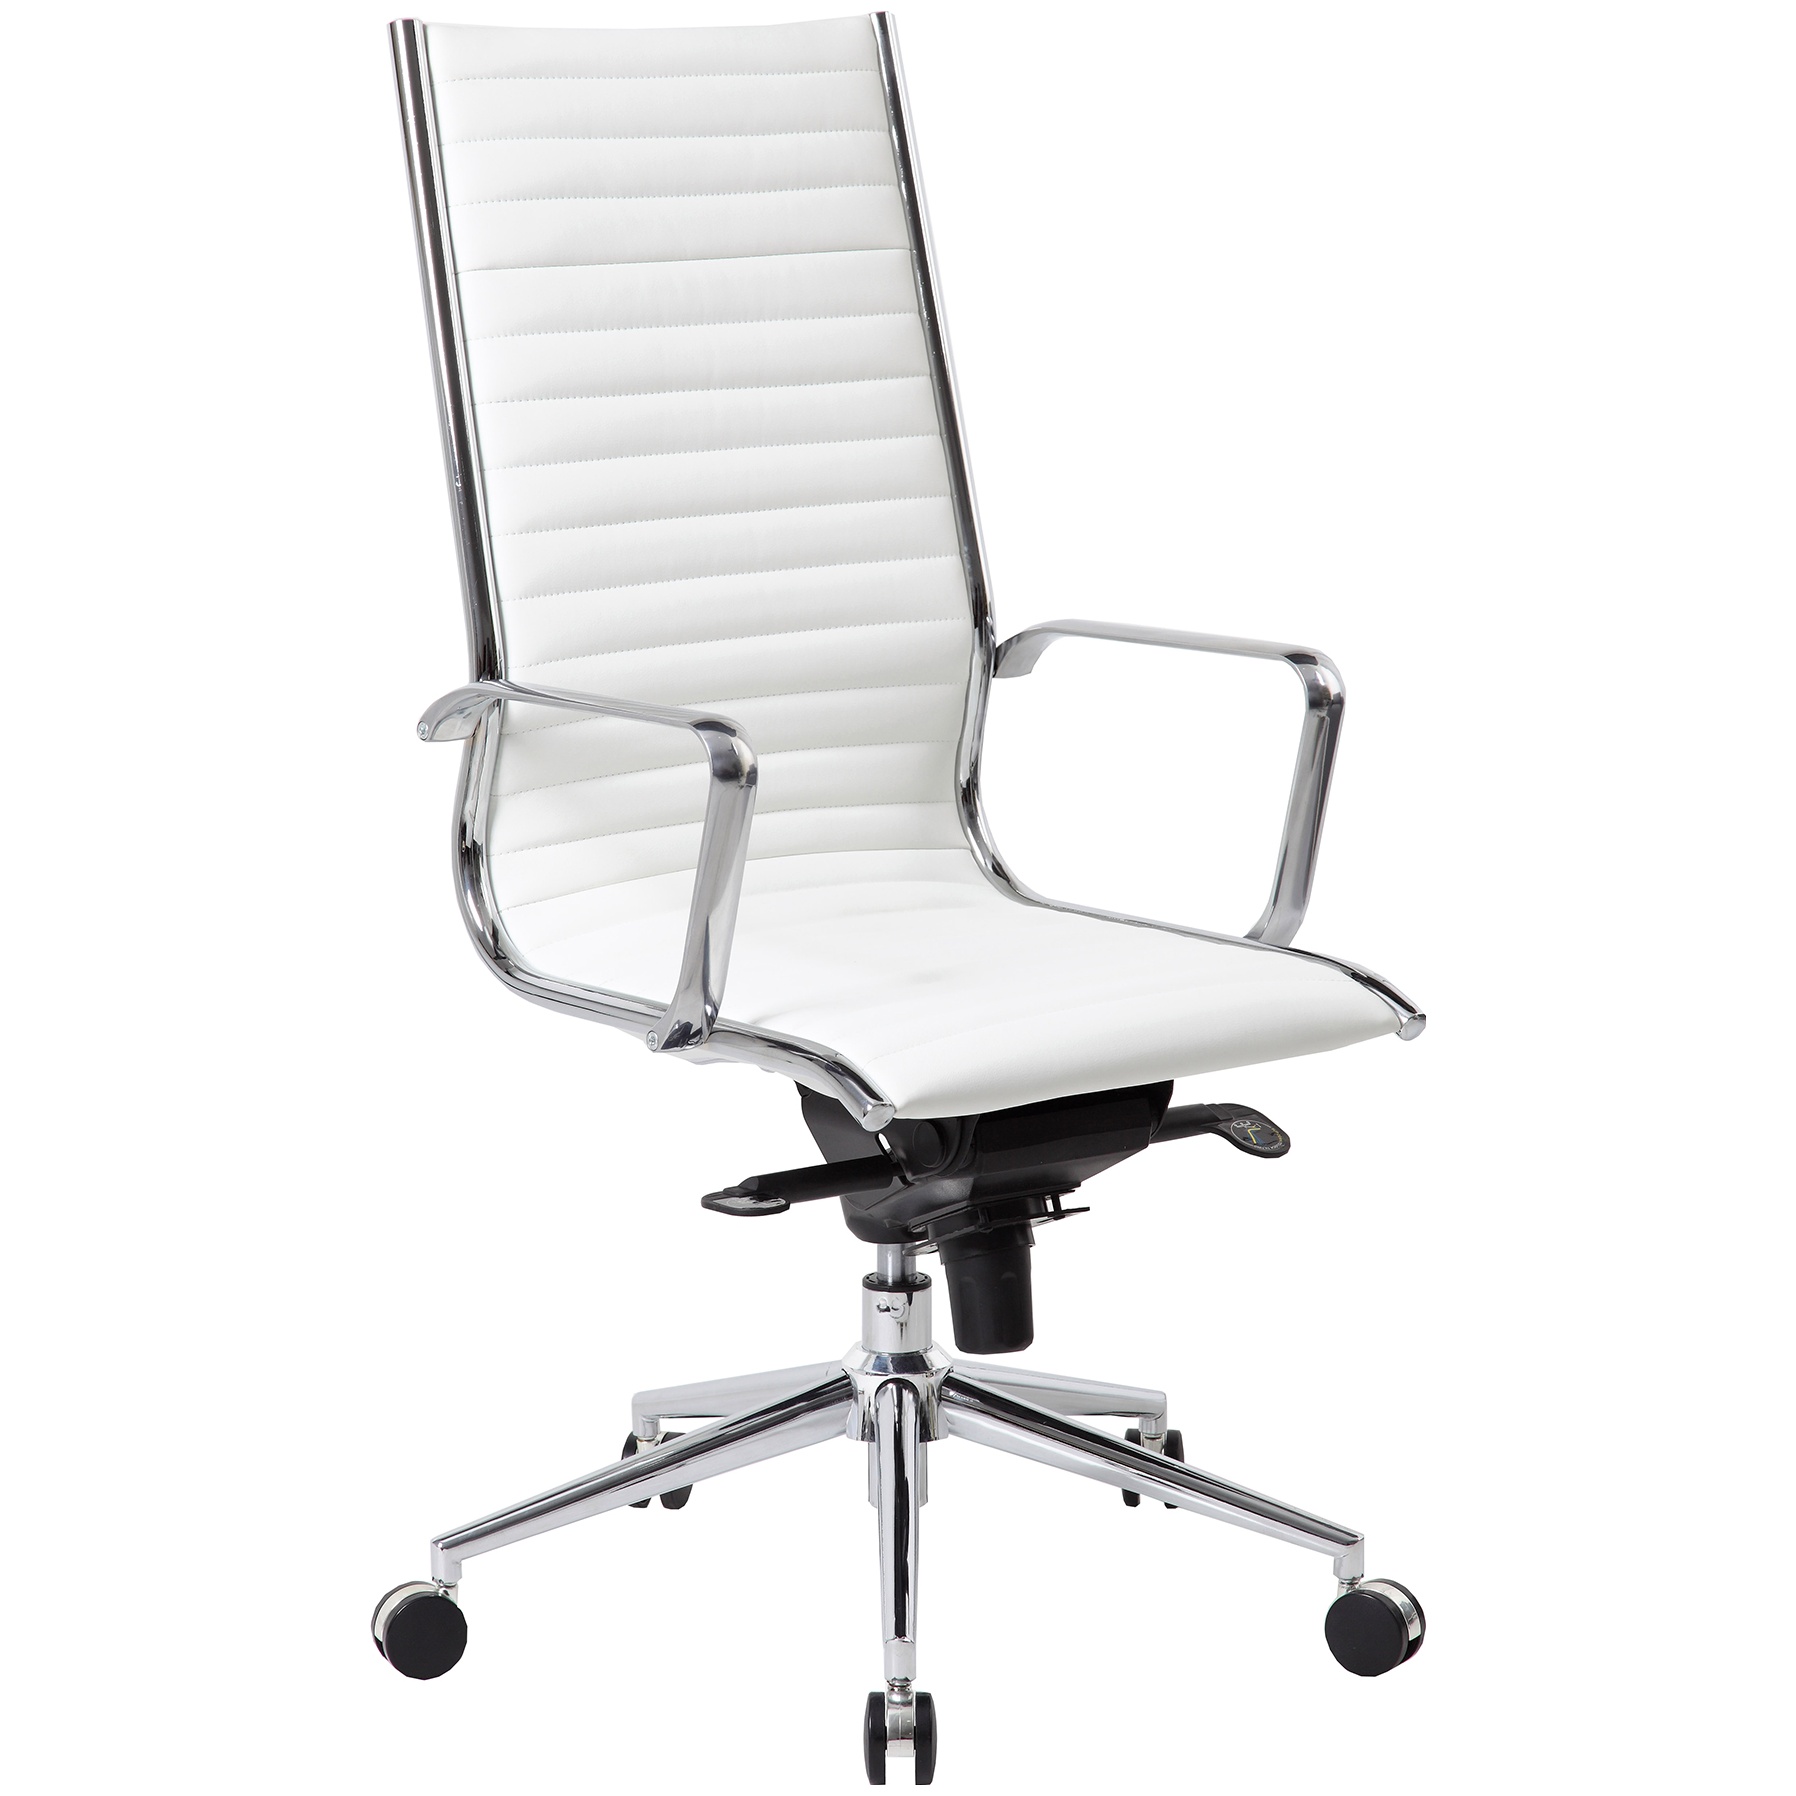 Abbey High Back Leather Office Chairs, White Leather Office Chairs Uk